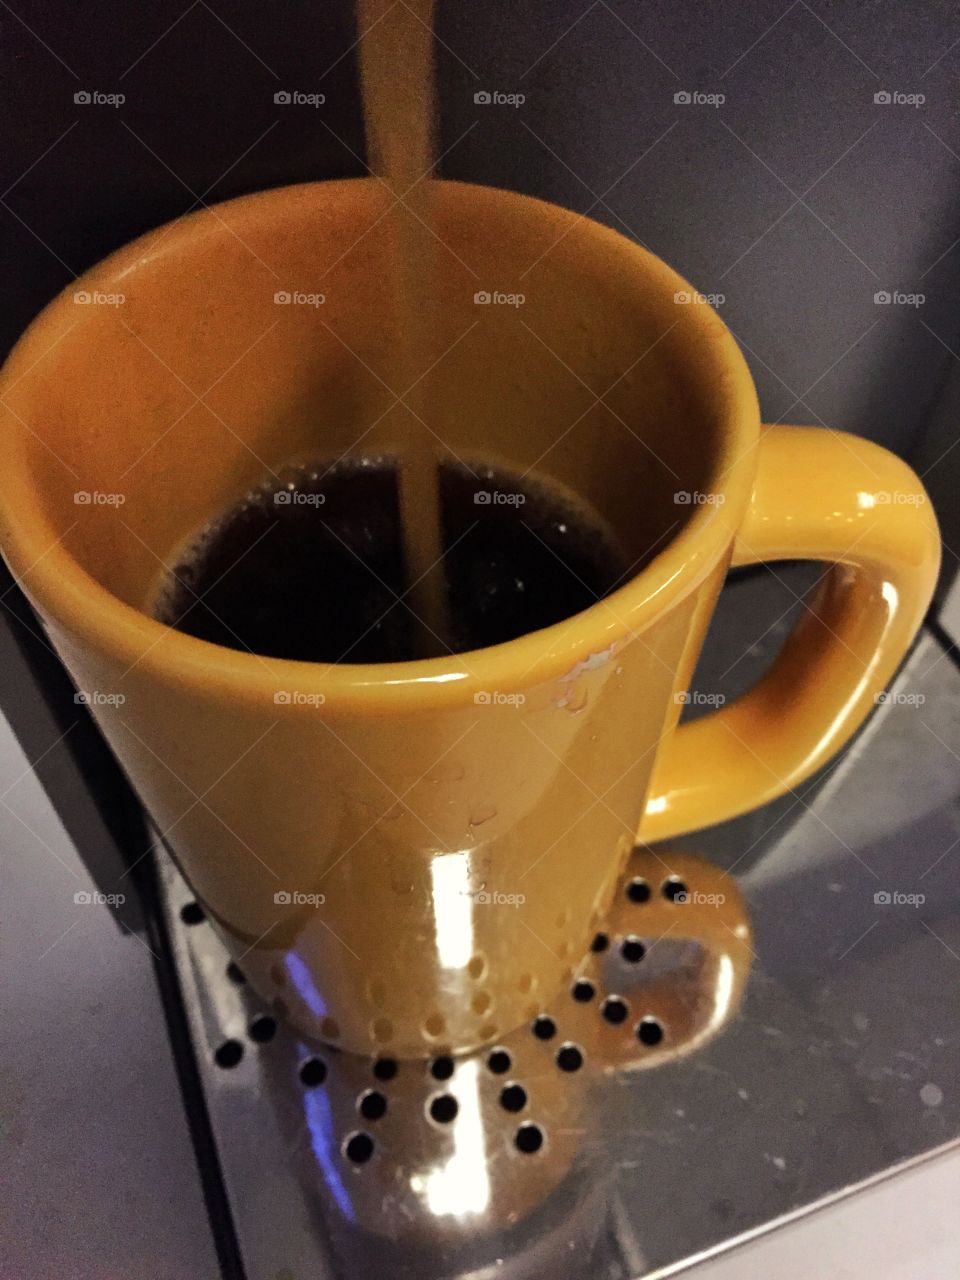 Cup of morning coffee . First cup of coffee in my Keurig